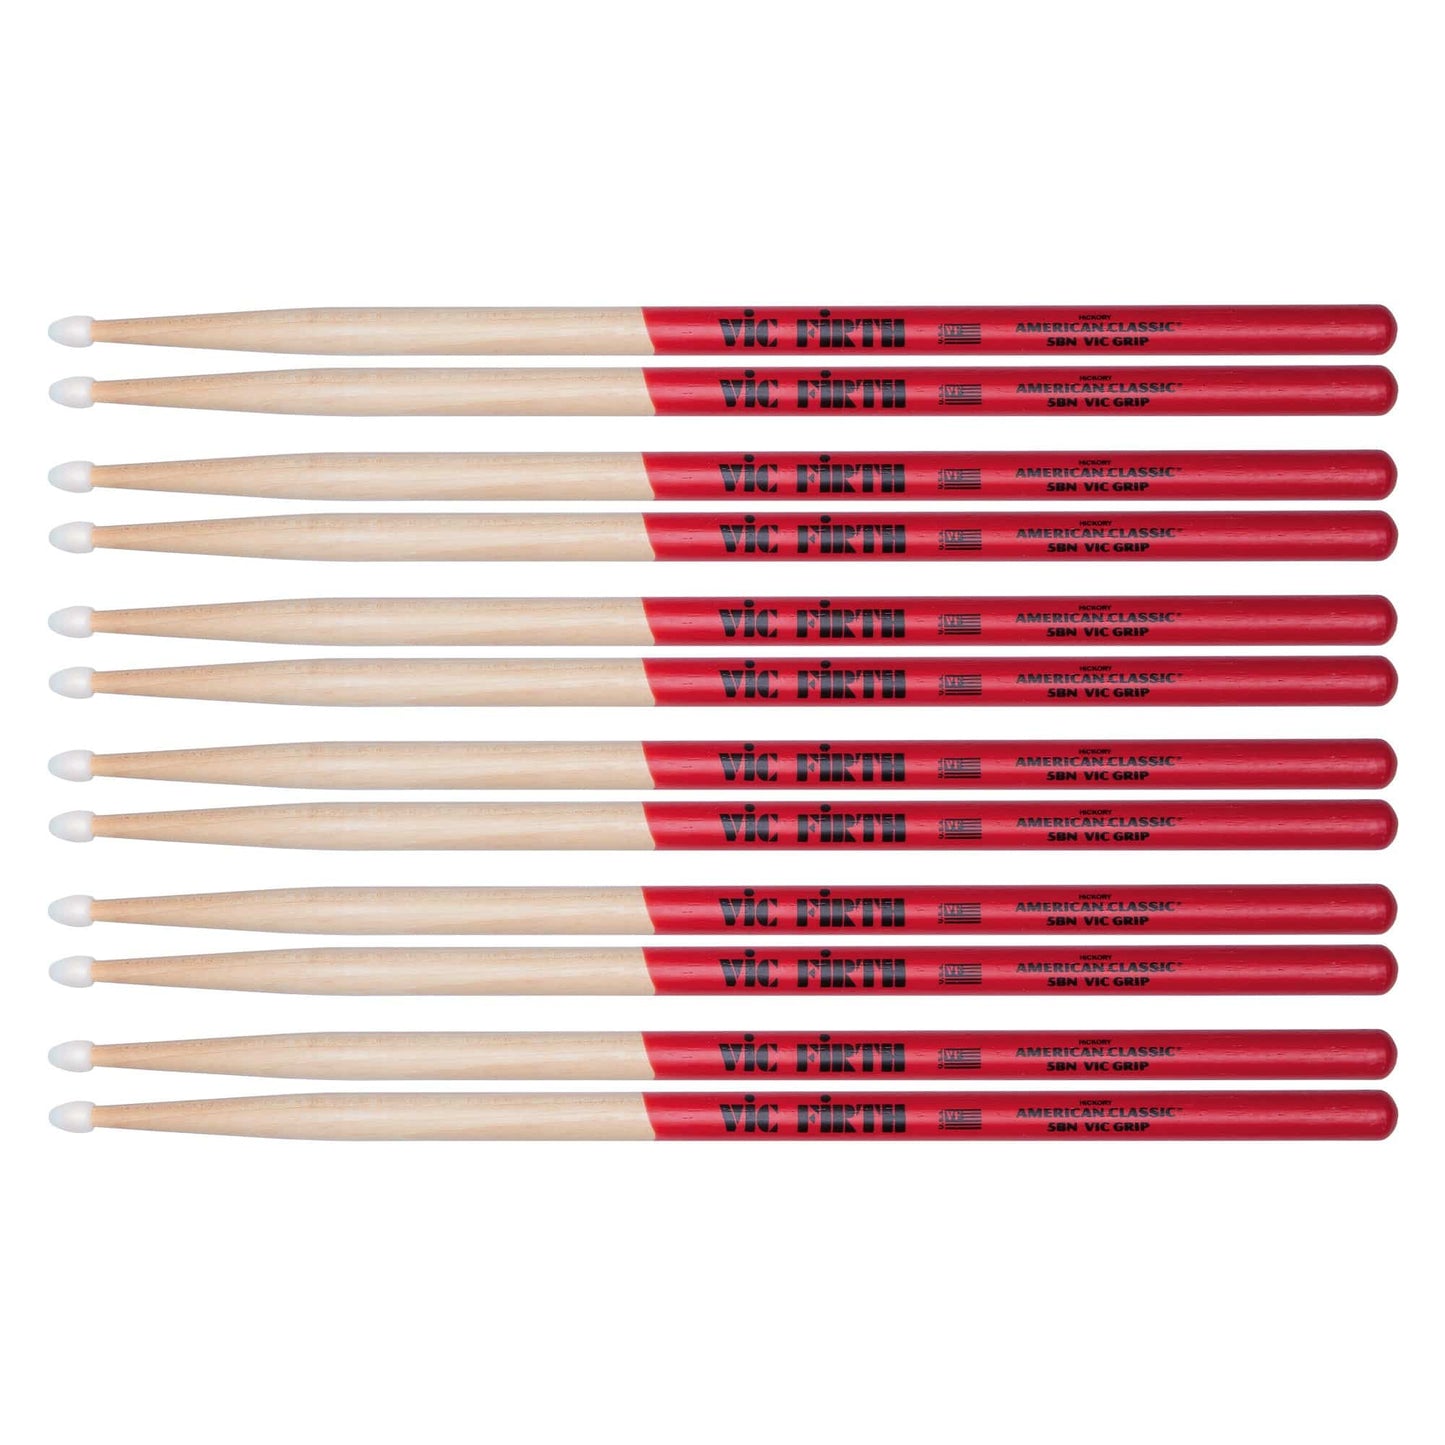 Vic Firth American Classic 5B Vic Grip Nylon Tip Drum Sticks (6 Pair Bundle) Drums and Percussion / Parts and Accessories / Drum Sticks and Mallets